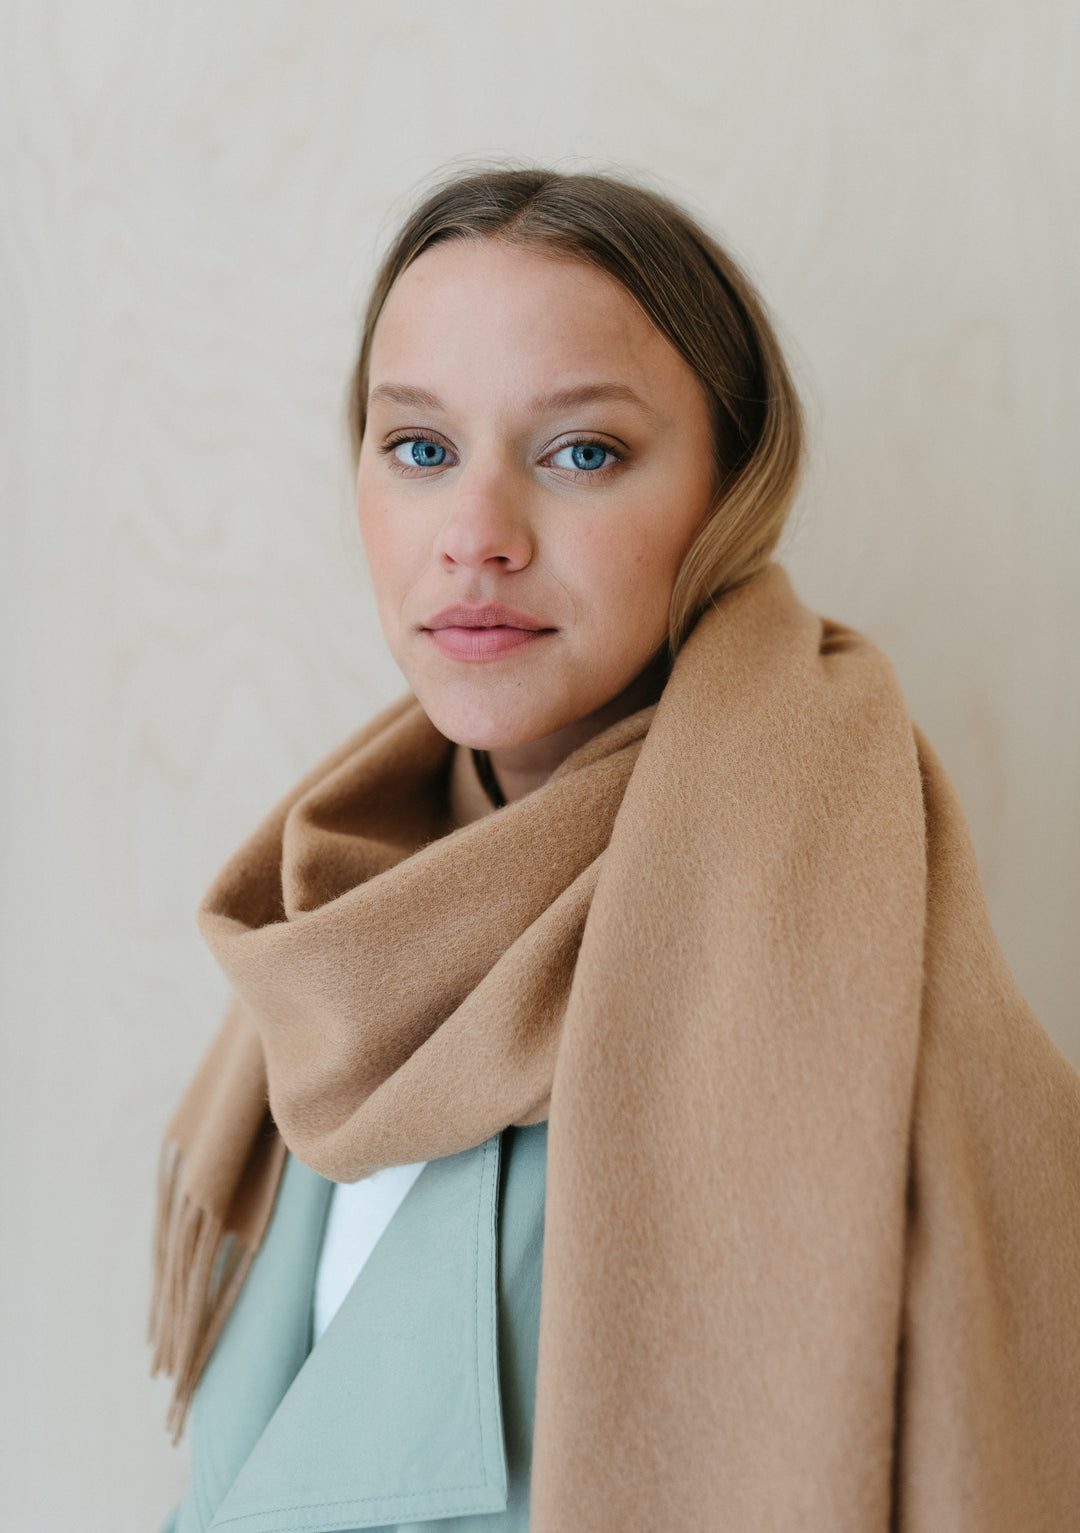 Lambswool Oversized Scarf in Camel